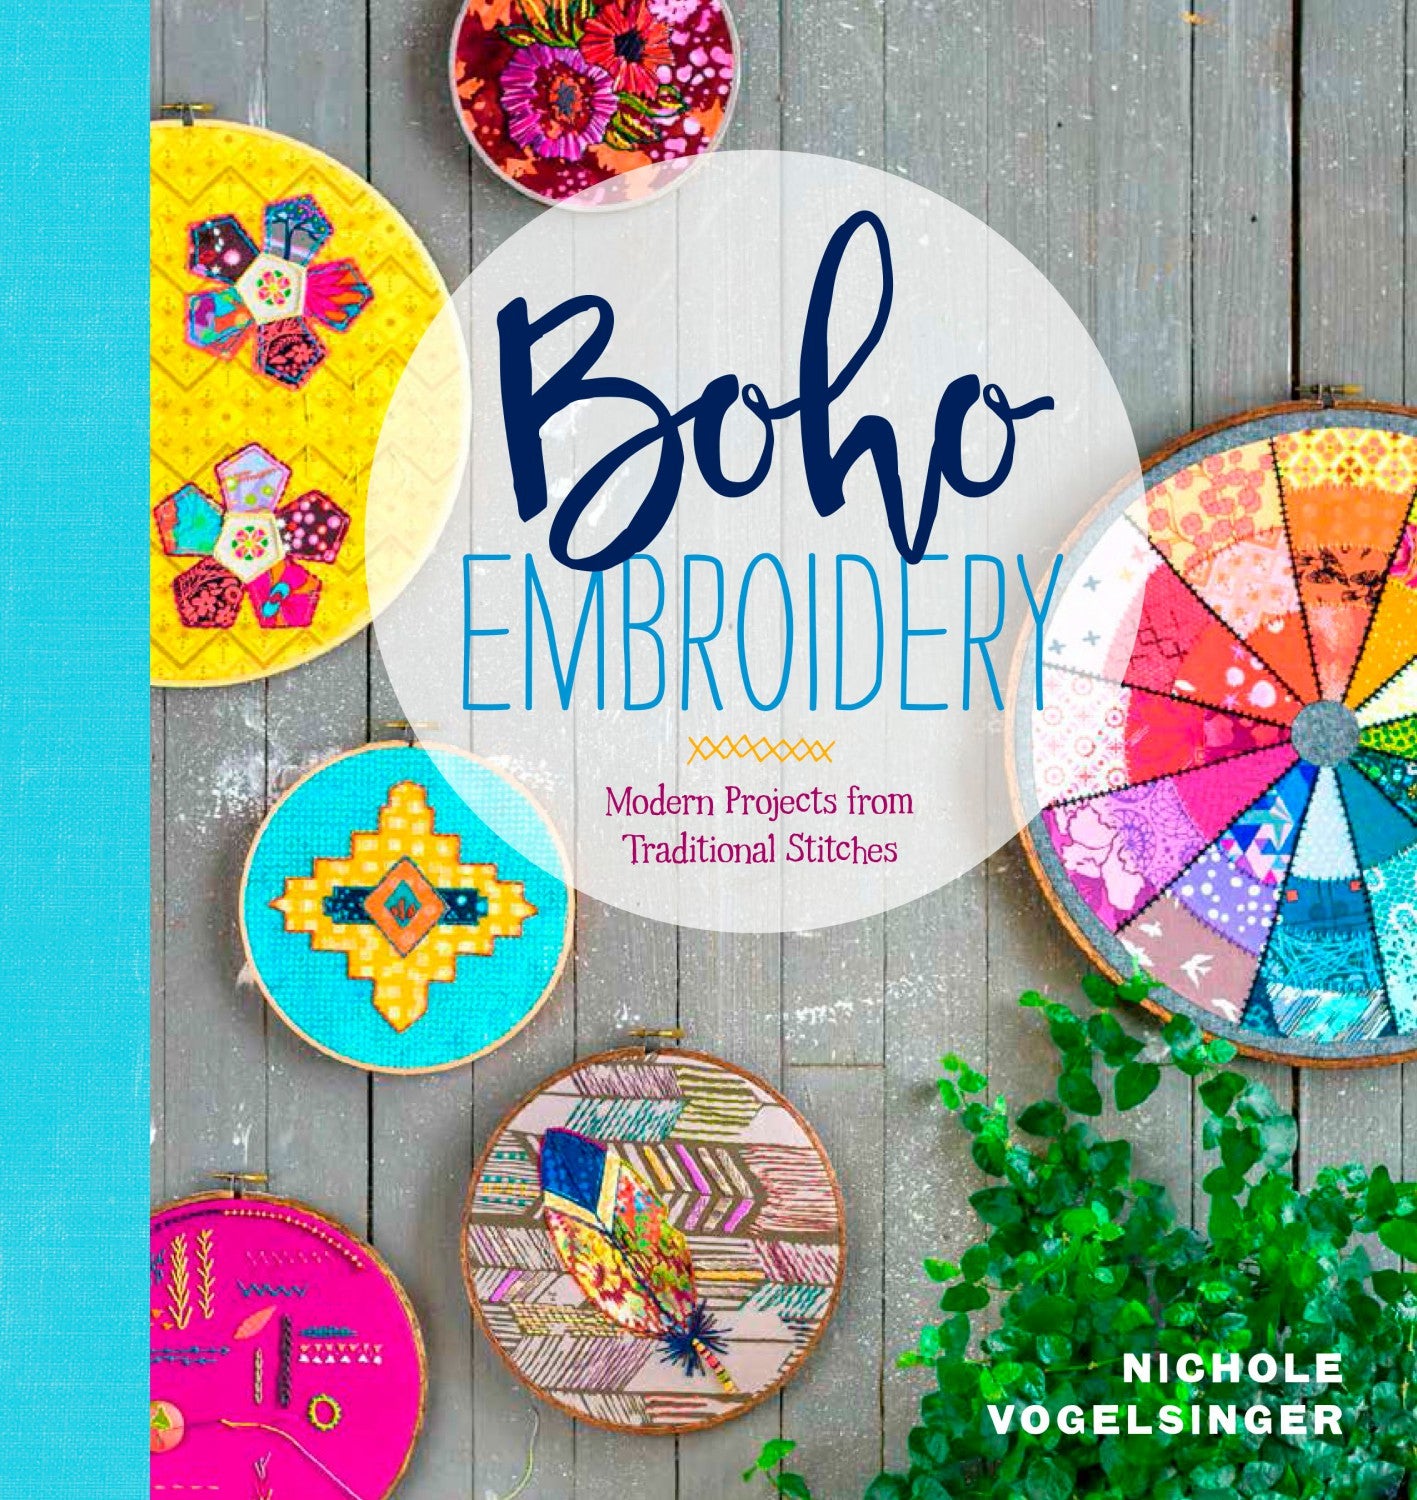 Boho Embroidery by Nicole Vogelsinger